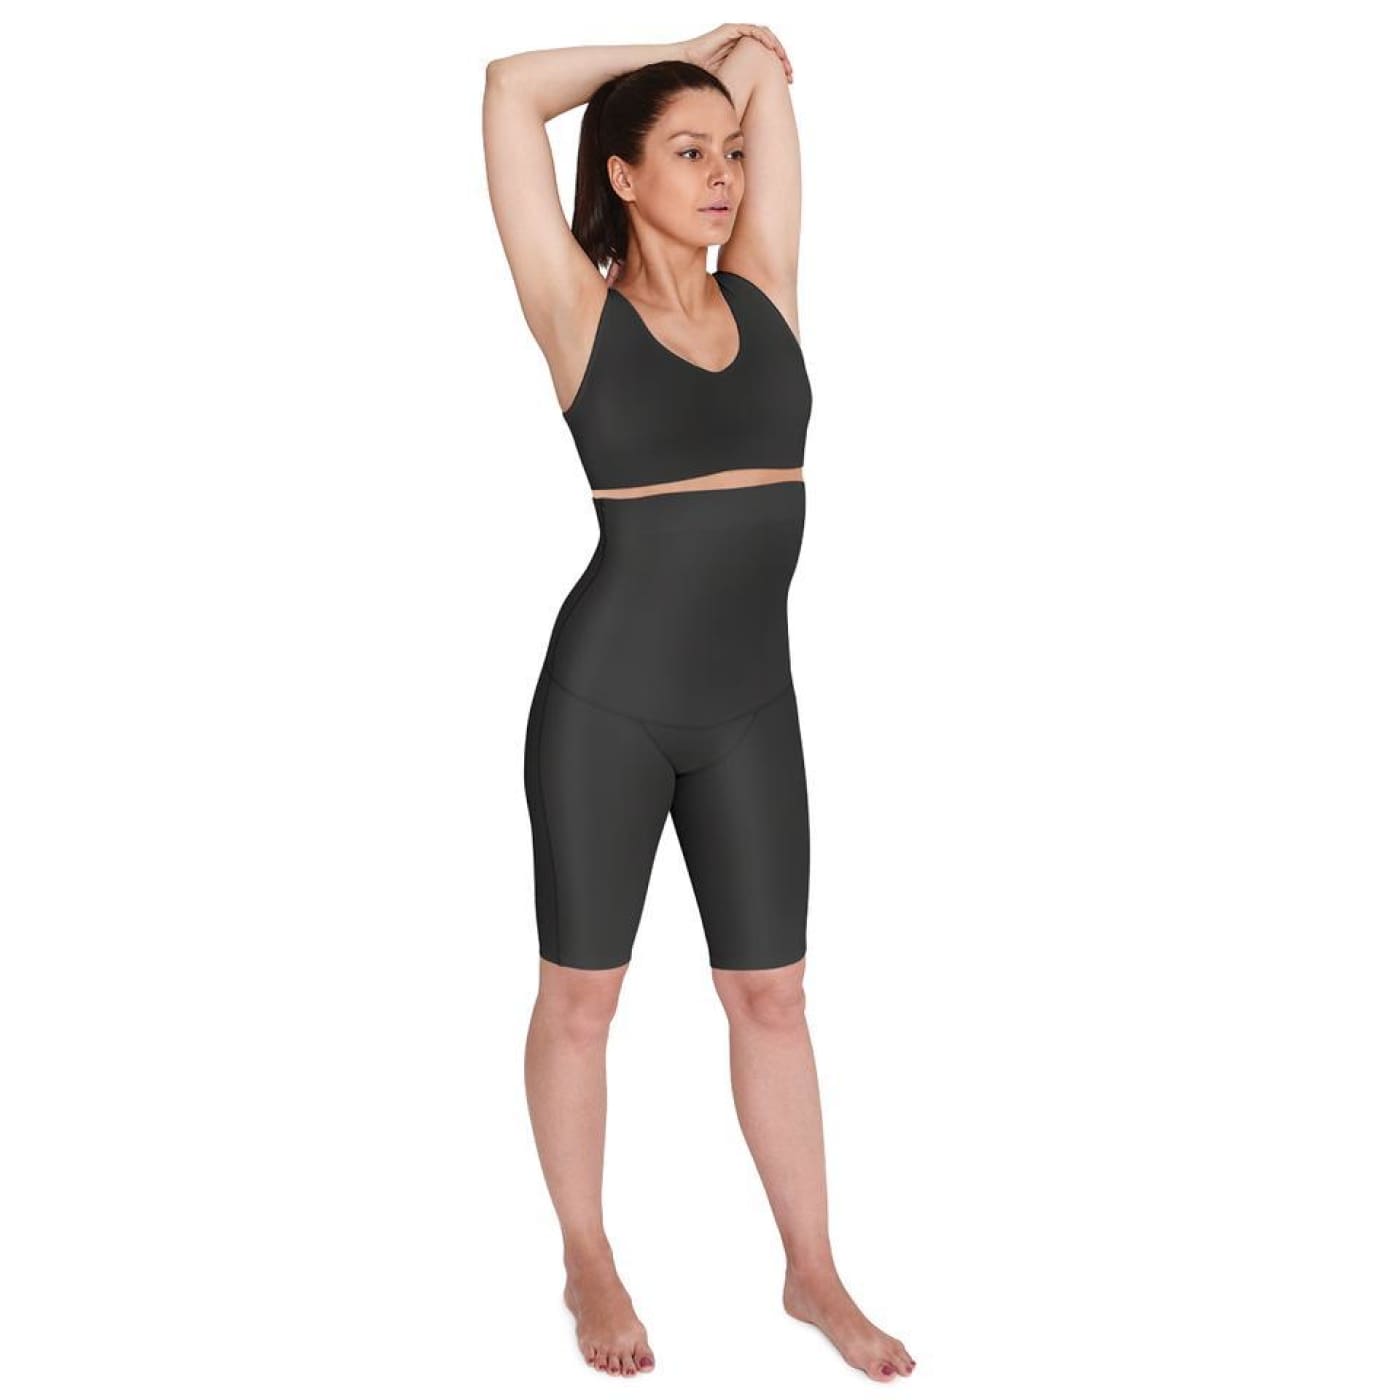 SRC Recovery Shorts - Black L - FOR MUM - MATERNITY SUPPORT GARMENTS (PRE/POST)